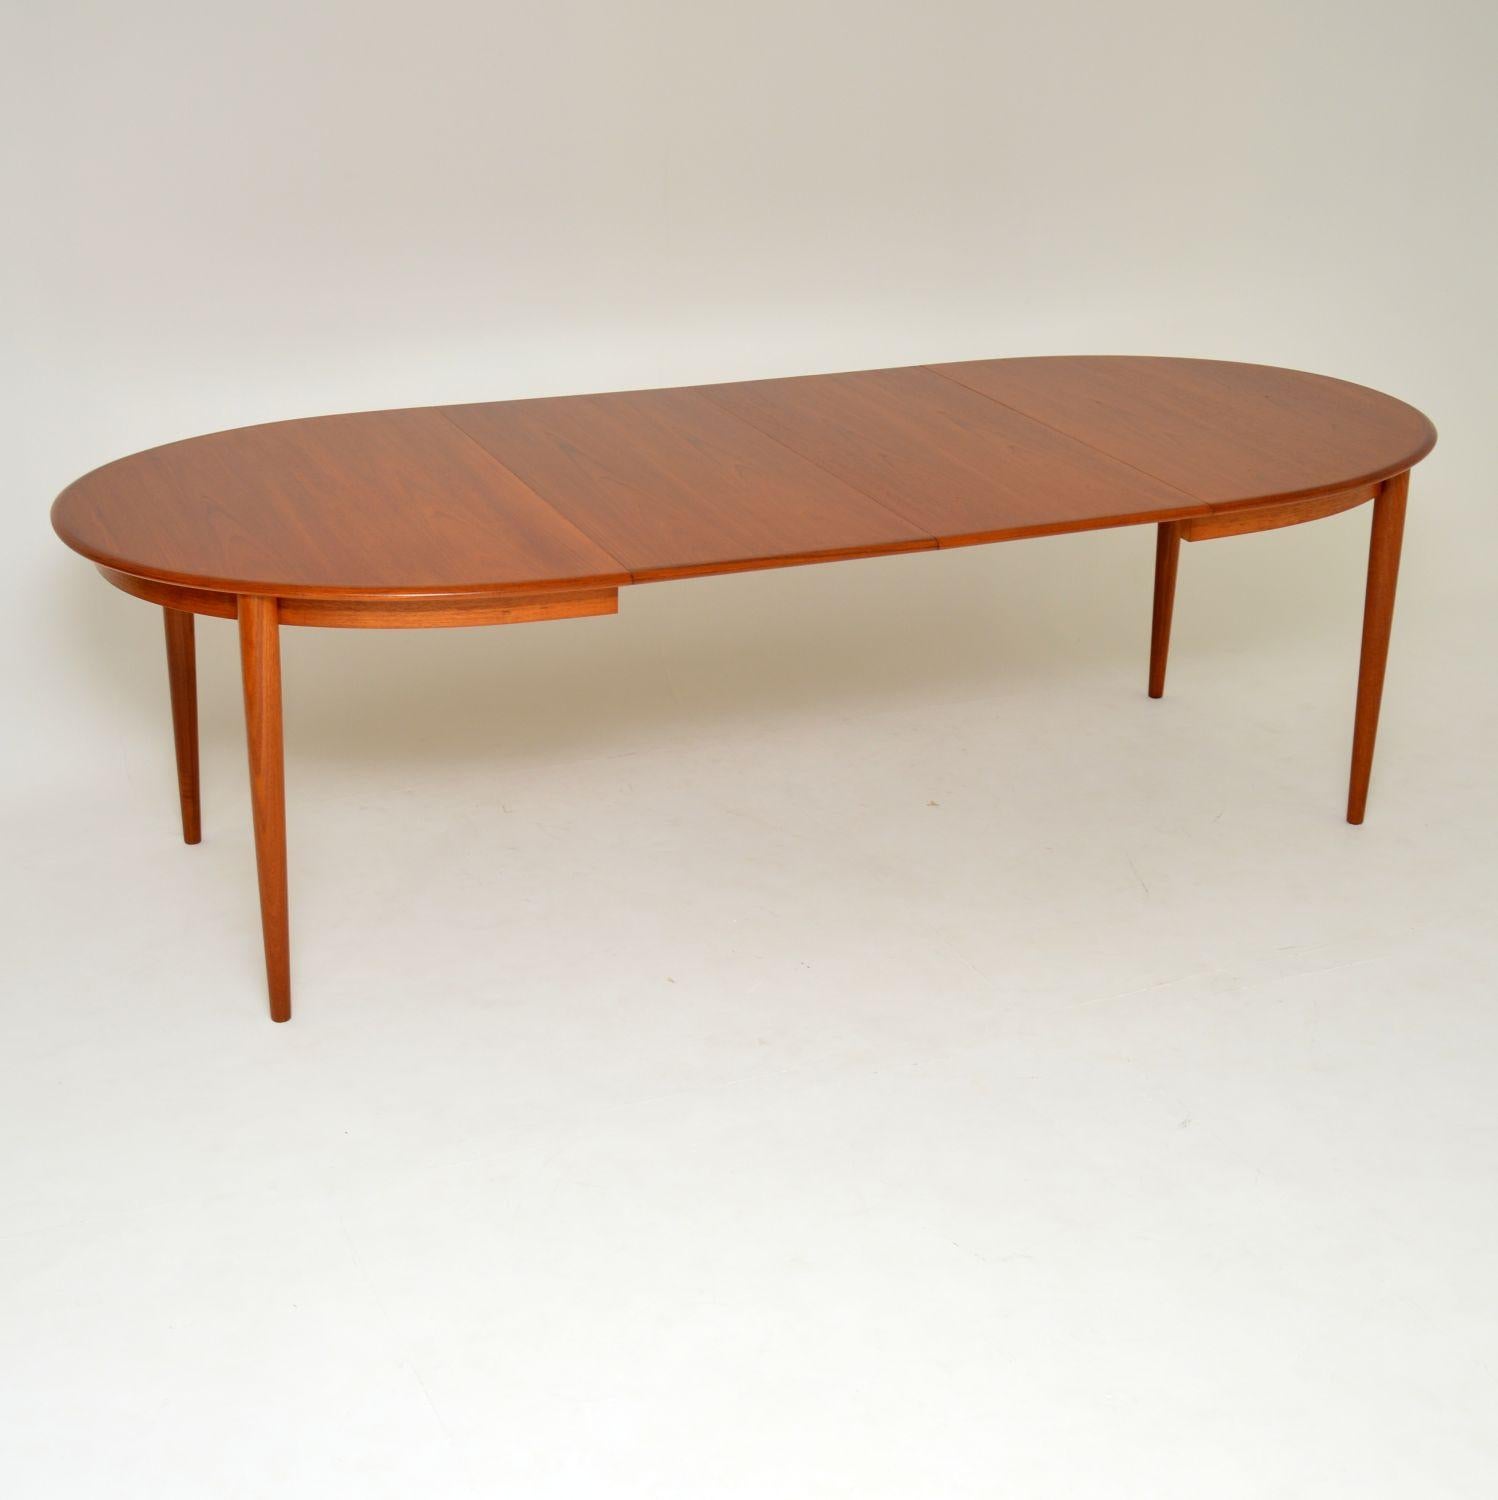 A stunning and top quality vintage Danish dining table in teak. This dates from the 1960s-1970s, and is in superb condition throughout. We have had this stripped and re-polished to a very high standard. There are two extra leaves that come with